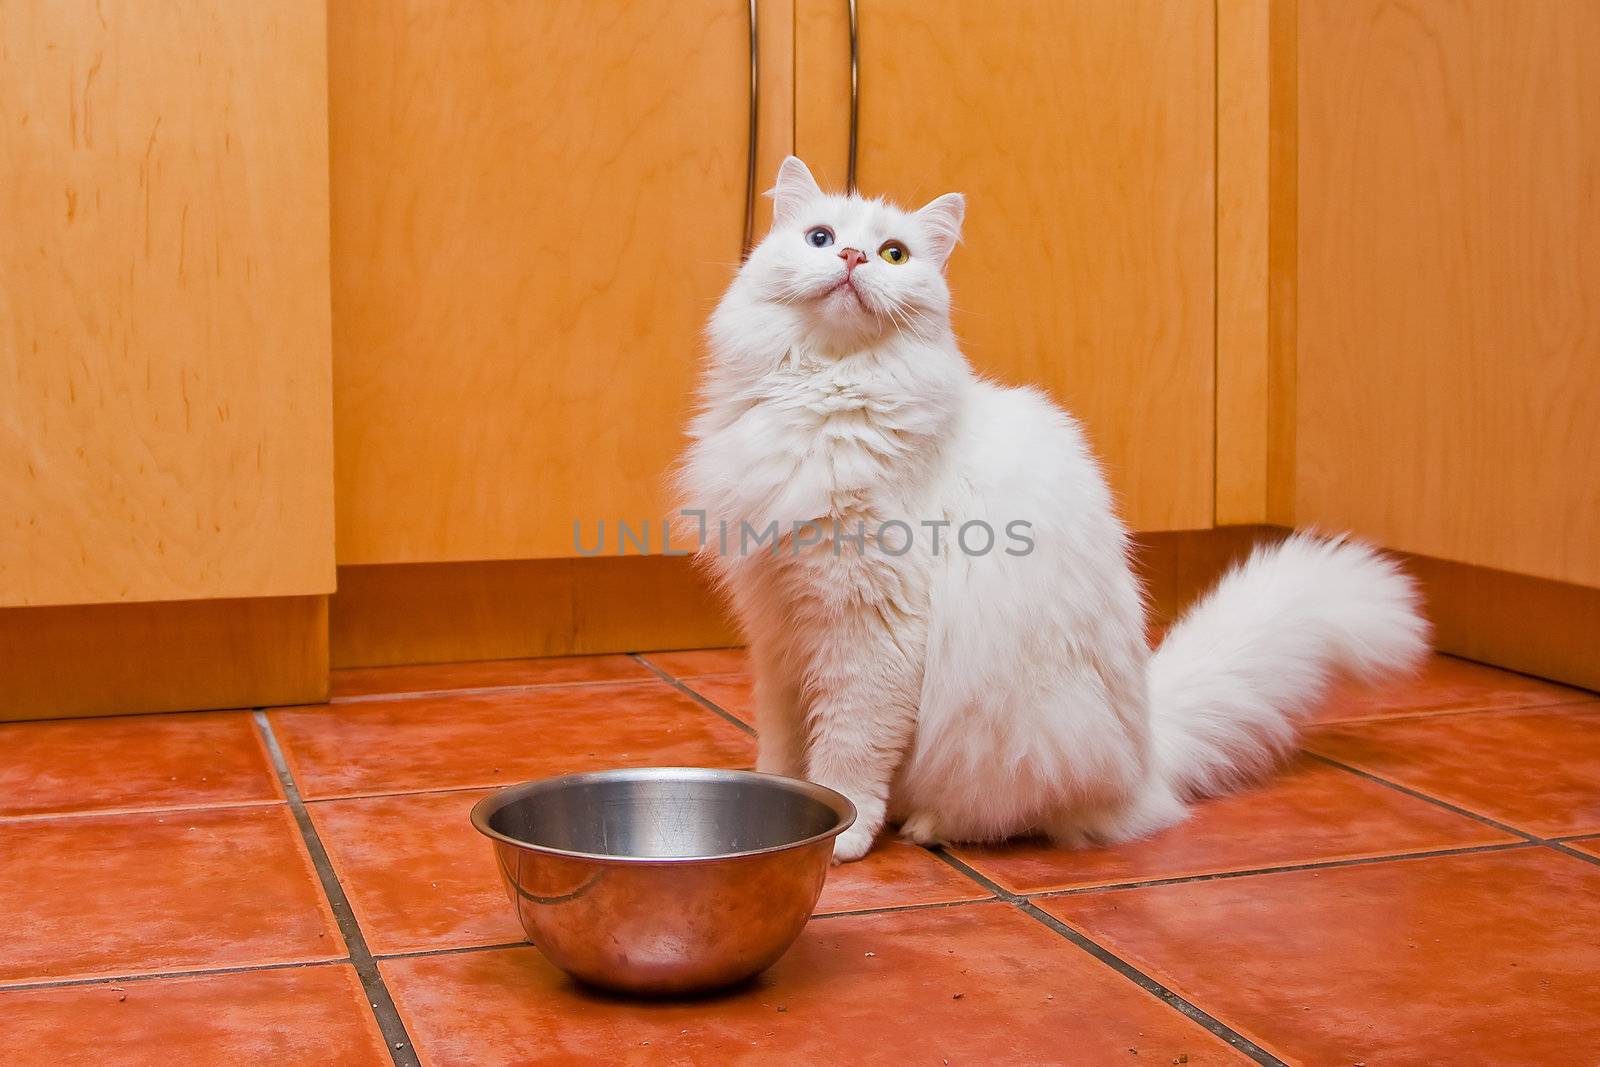 Beautiful white Raggamuffin cat with 2 color eyes waiting to be served some food next to his/her food bowl in an orange kitchen